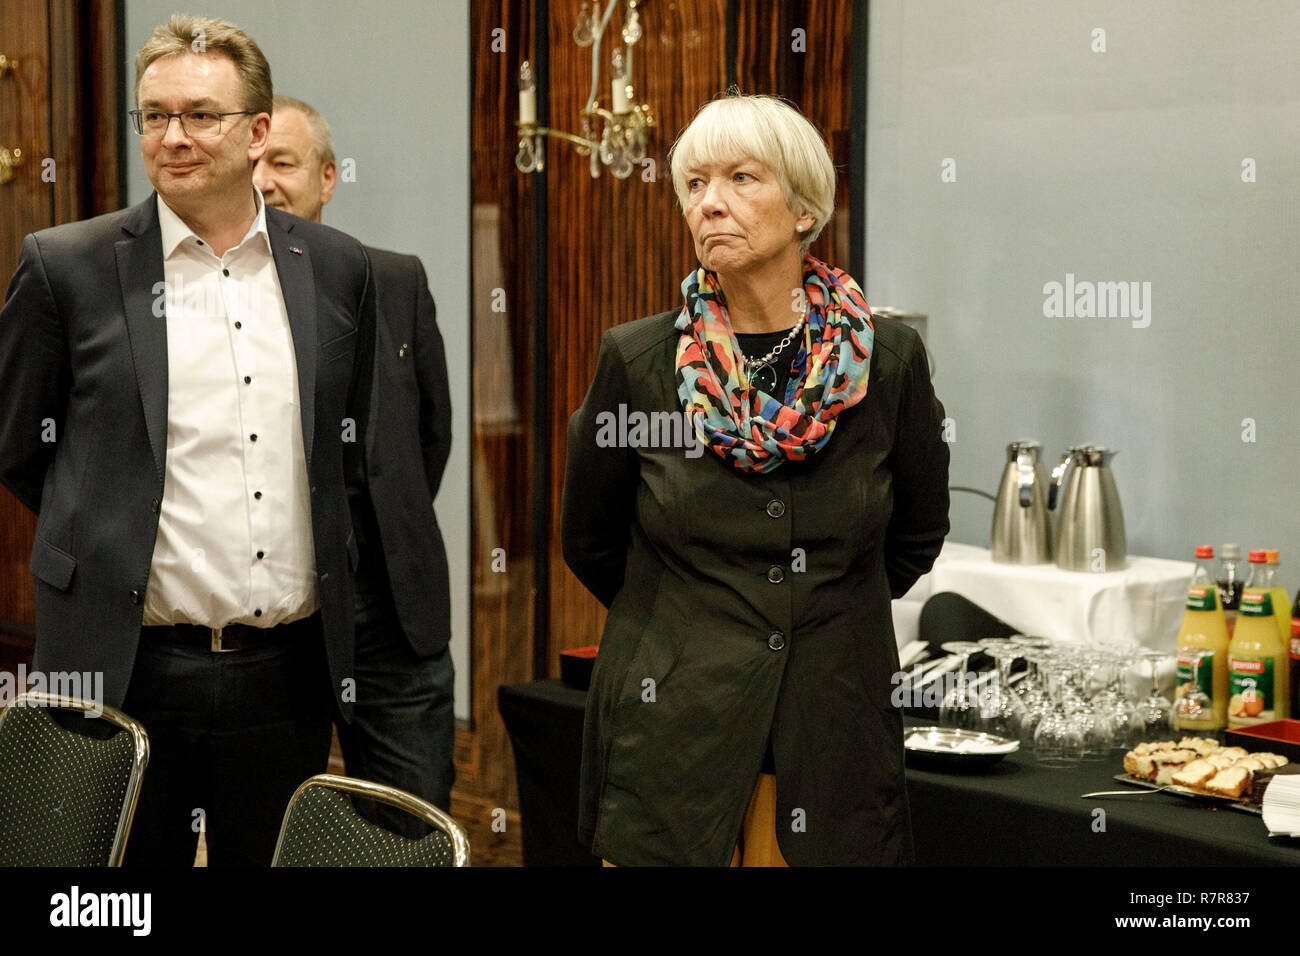 Berlin, Germany. 11th Dec, 2018. Regina Rusch-Ziemba (r), Vice-Chairwoman of the Railway and Transport Union (EVG) and EVG negotiator, is standing next to Torsten Westphal (l), Federal Managing Director of EVG, before the start of the collective bargaining talks between the Railway and Transport Union (EVG) and Deutsche Bahn. Credit: Carsten Koall/dpa/Alamy Live News Stock Photo